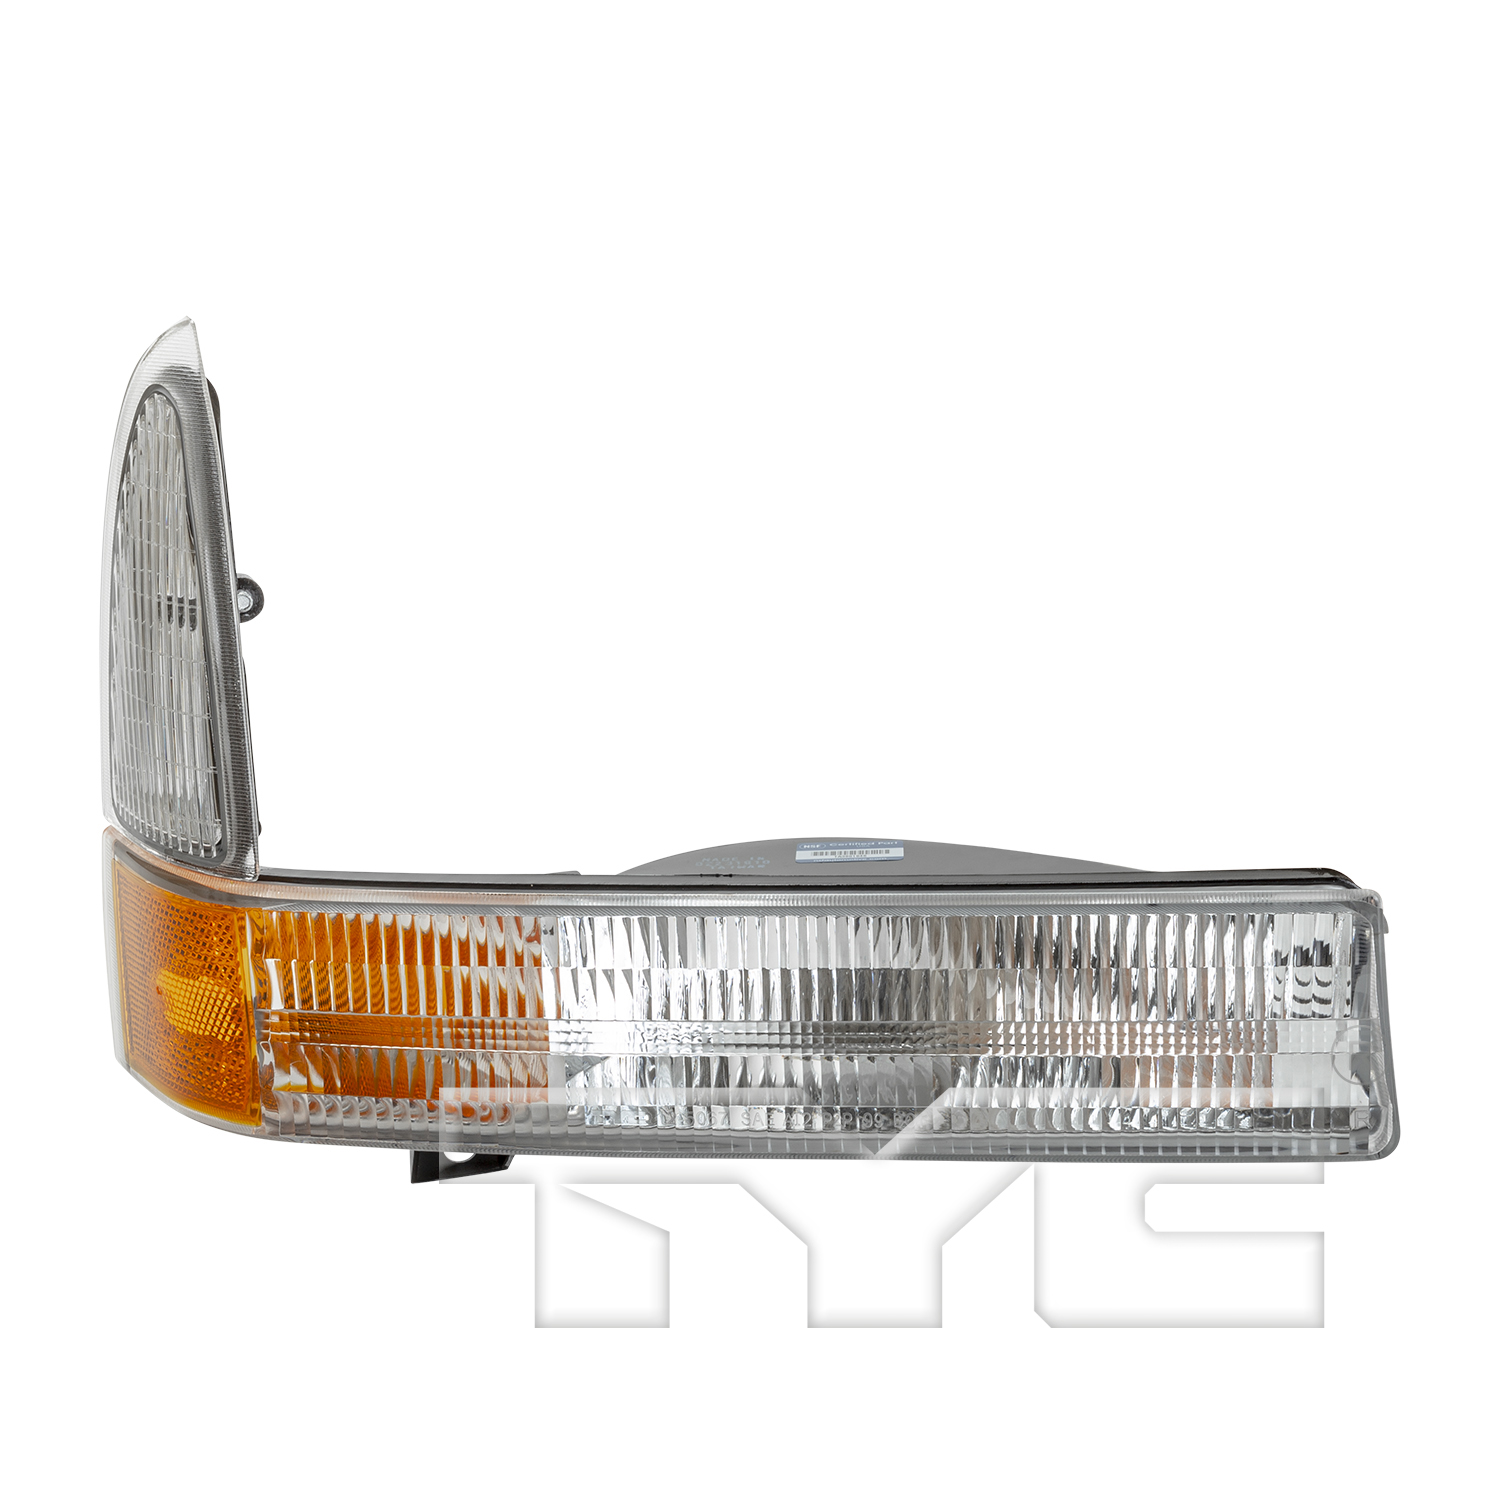 Aftermarket LAMPS for FORD - F-250 SUPER DUTY, F-250 SUPER DUTY,02-05,RT Parklamp assy